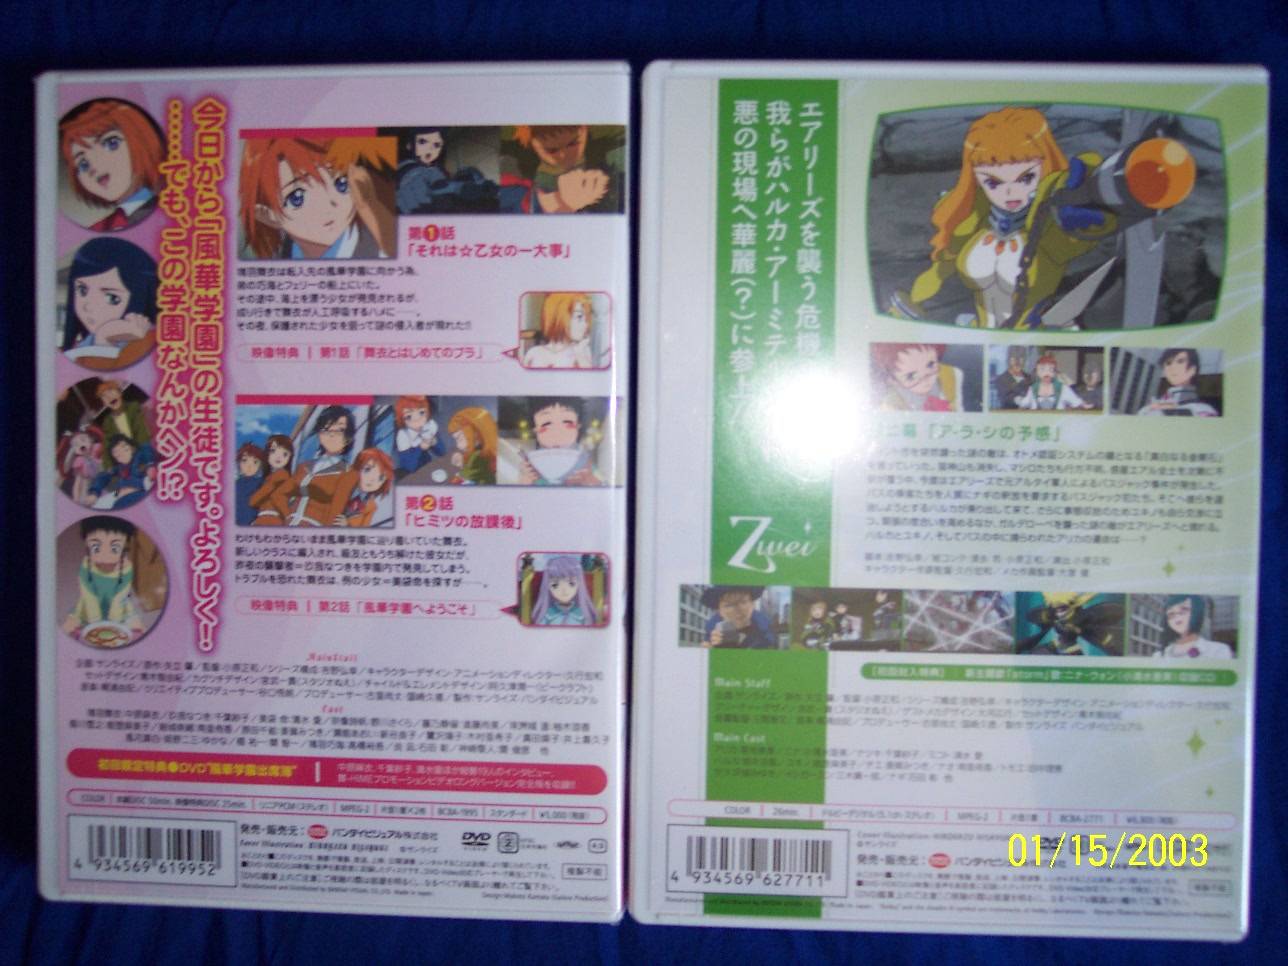 Mai-HiME and Mai-Otome Zwei DVDs